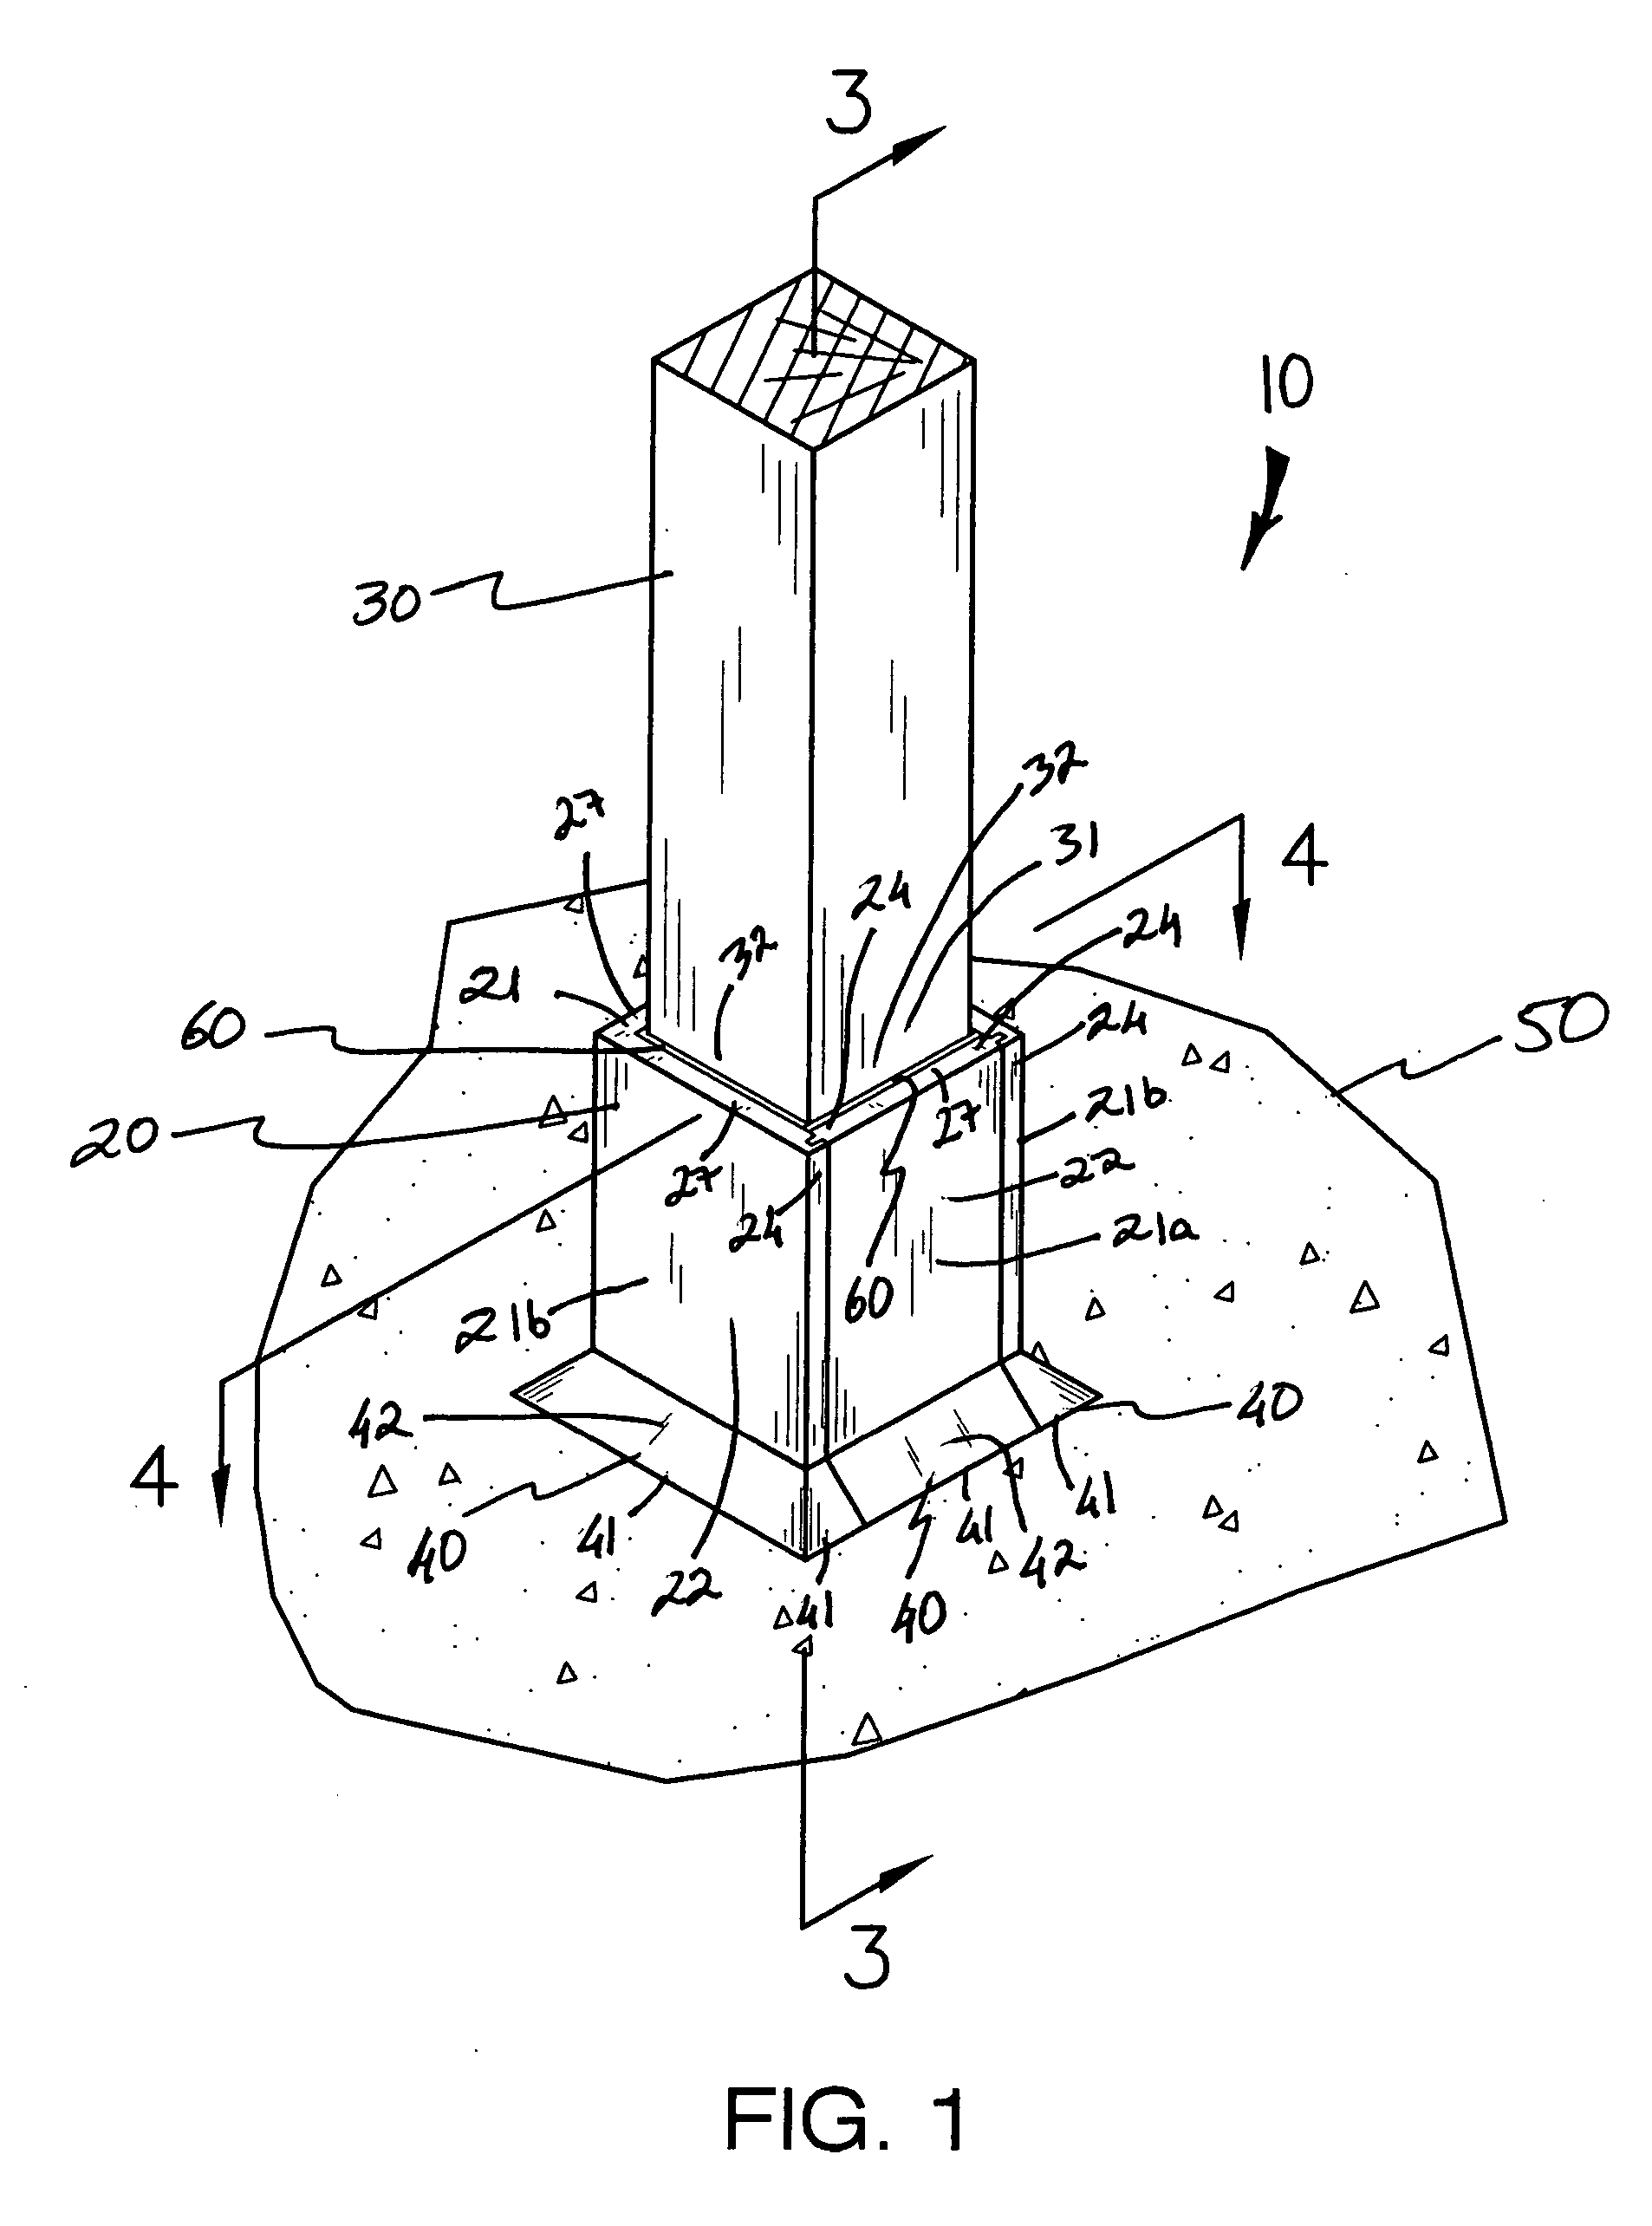 Fence post protecting apparatus